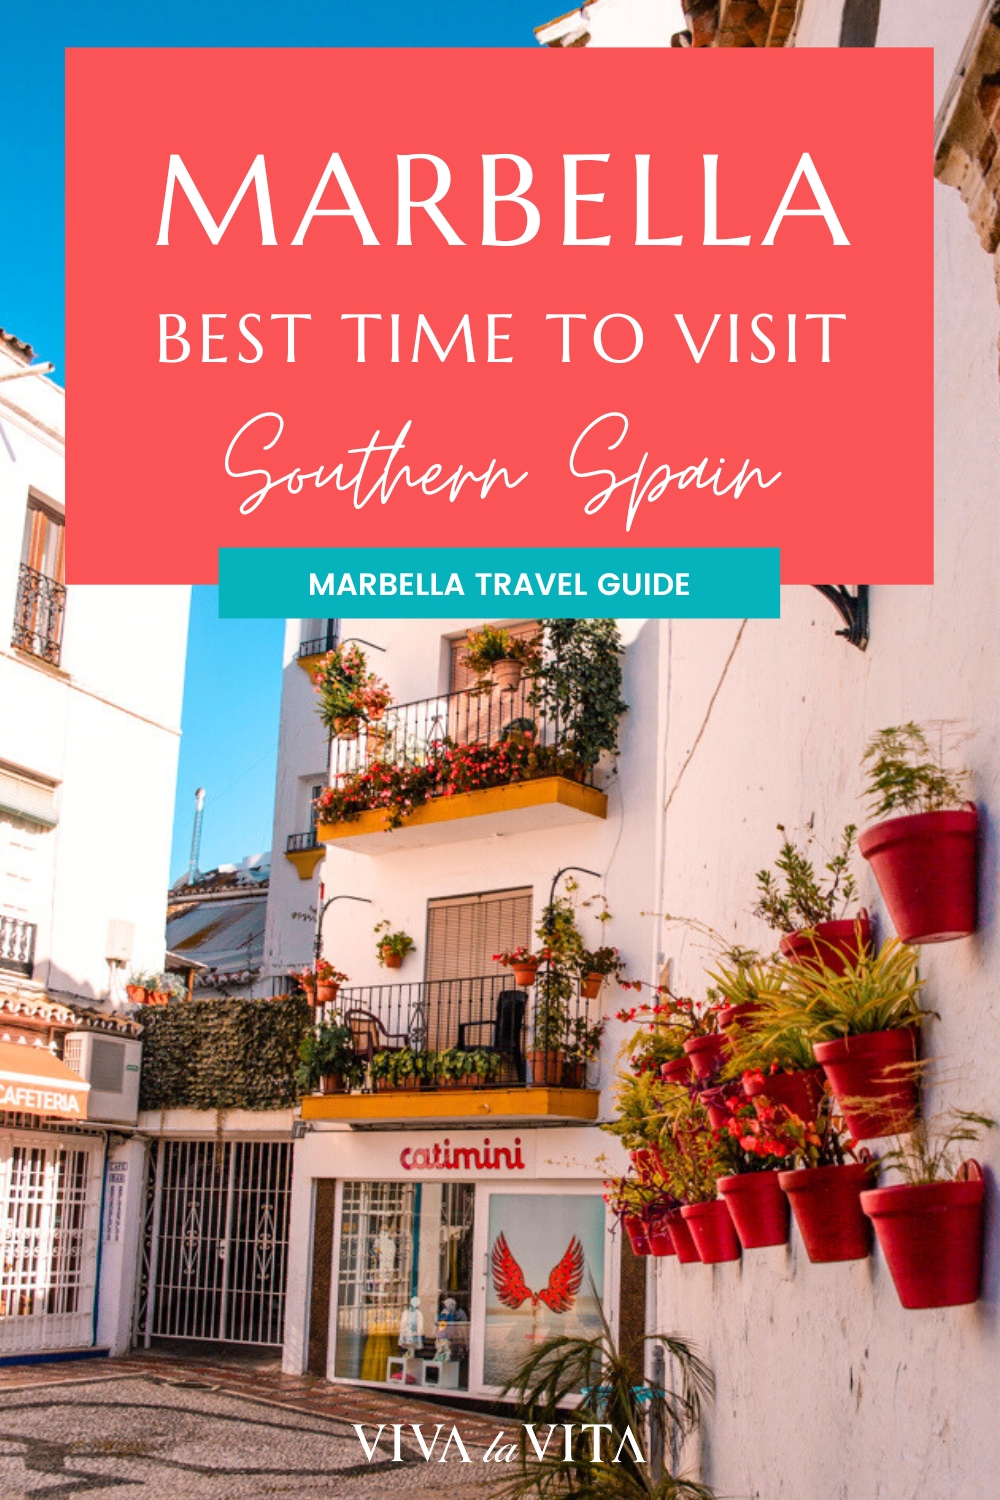 pinterest image showing Marbella old town in Southern Spain, with a headline reading: marbella best time to visit Southern Spain - Marbella travel guide